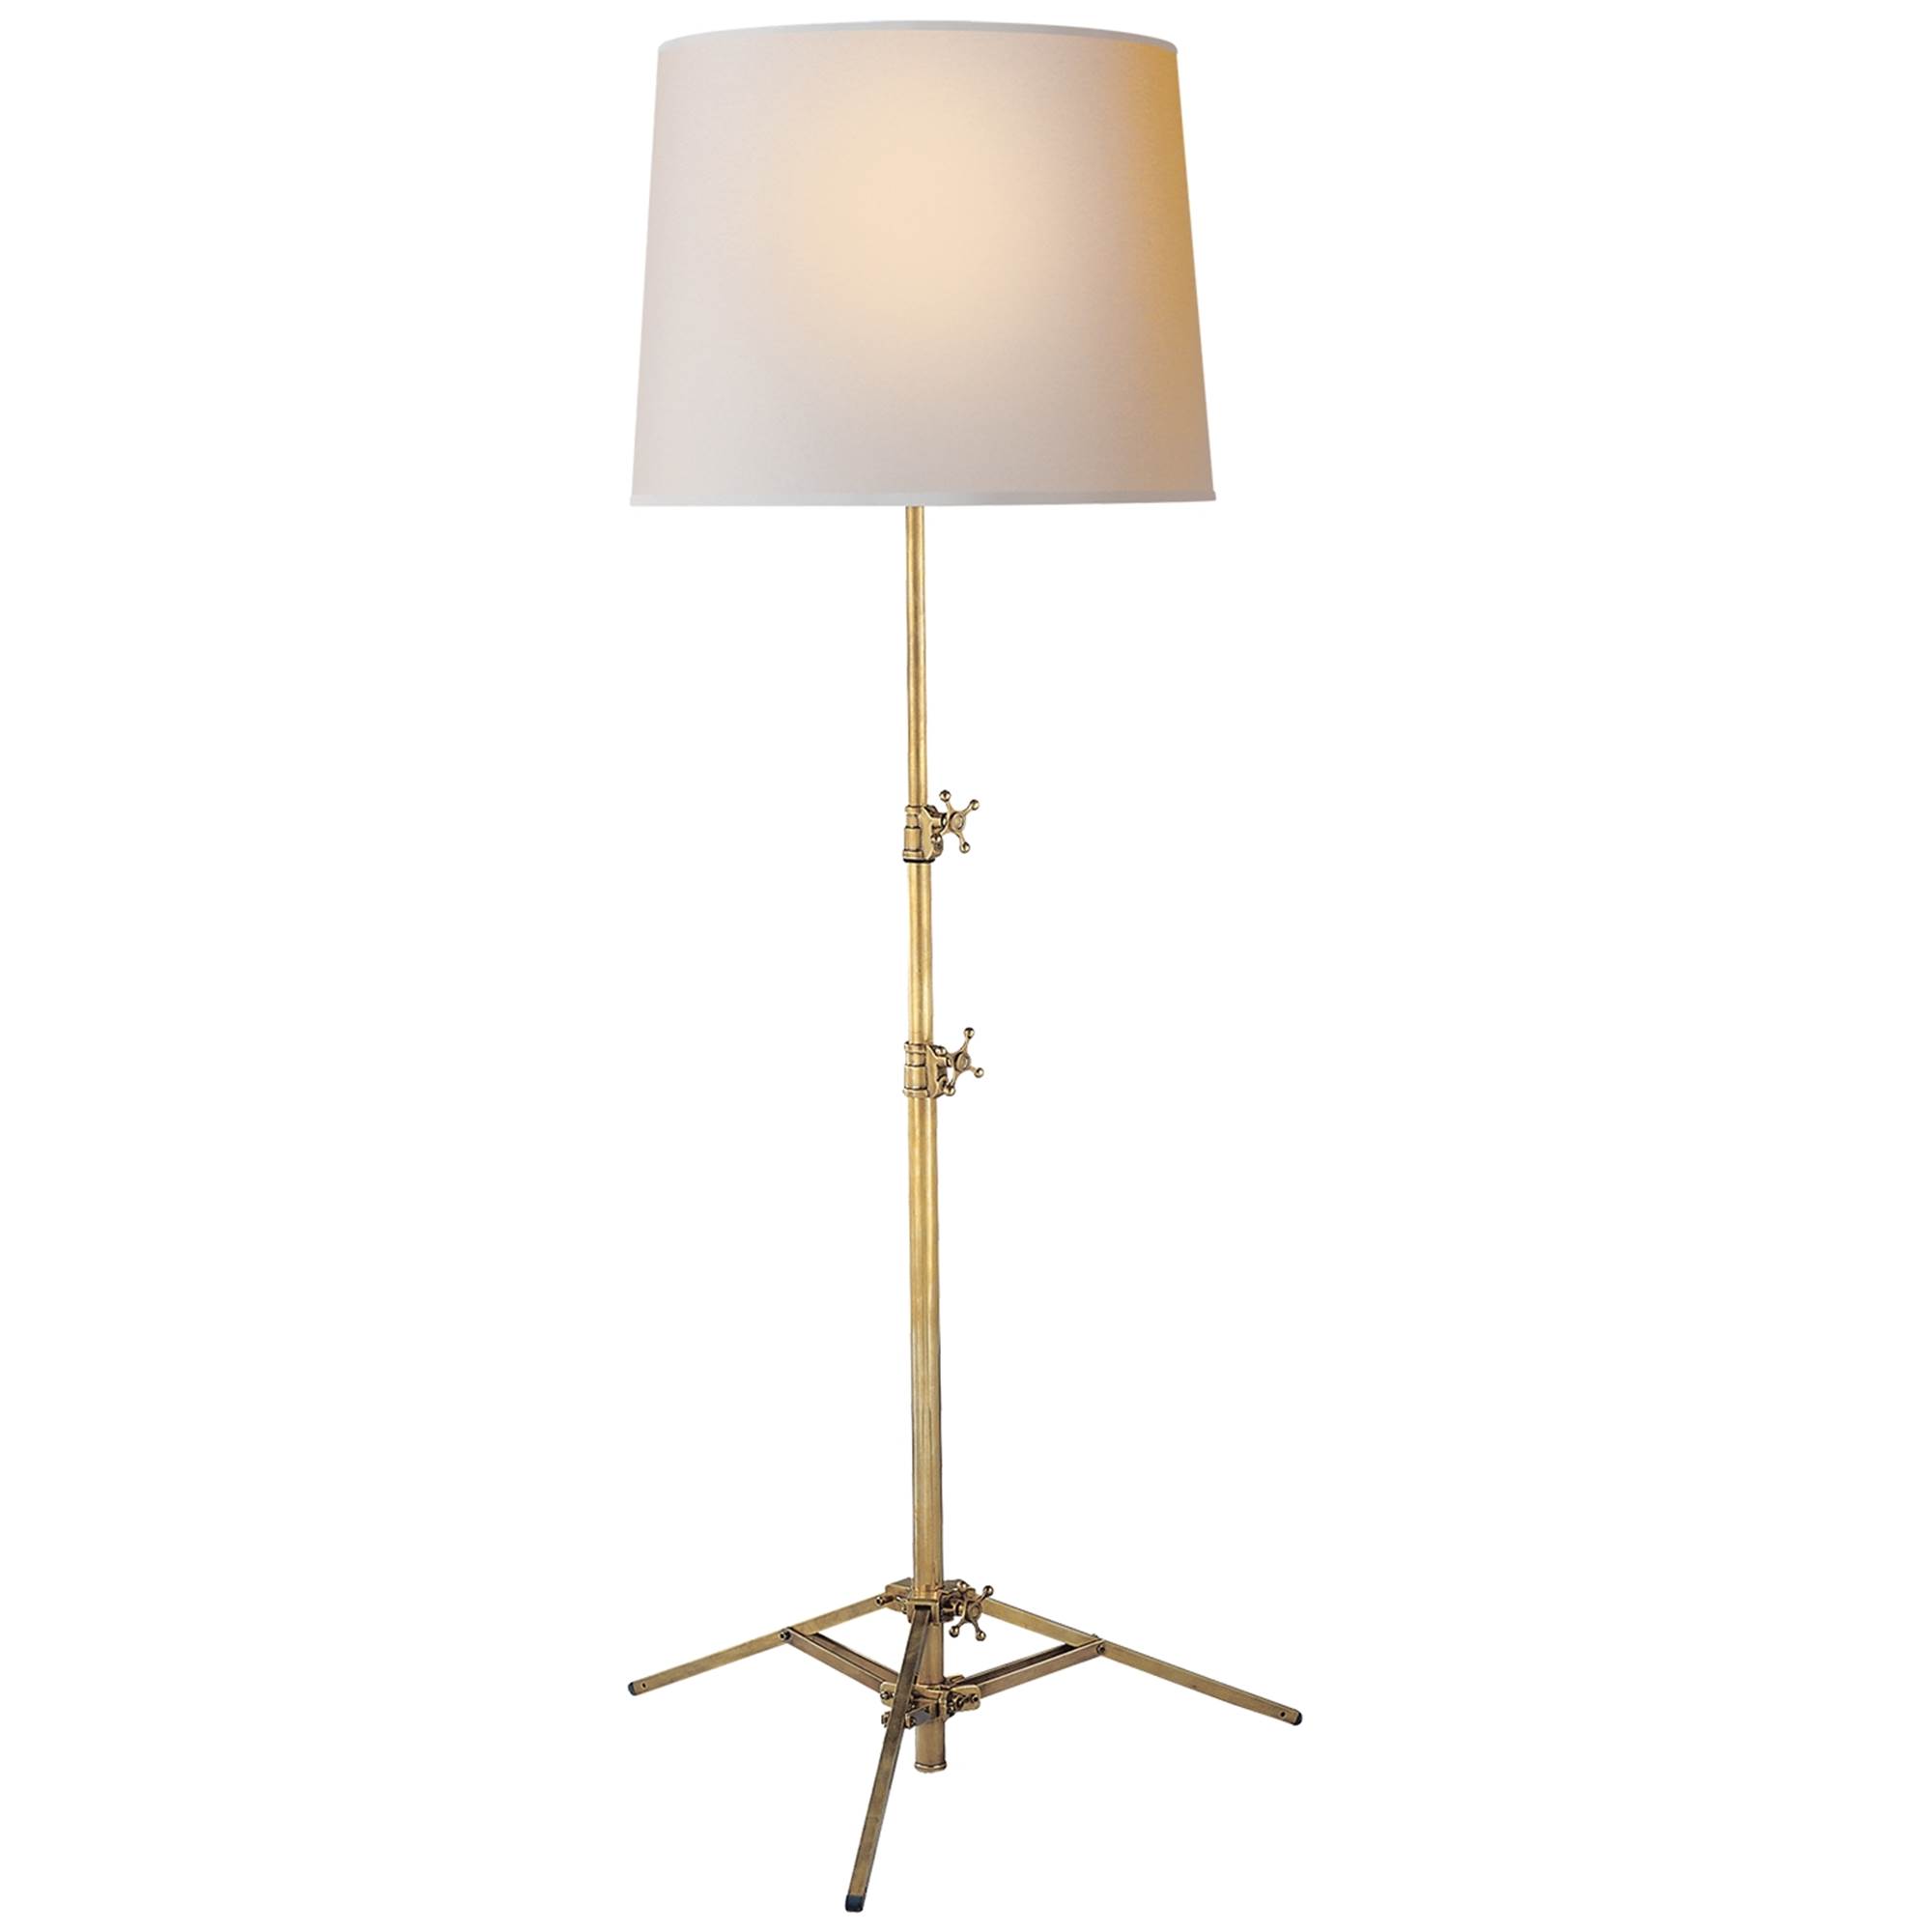 Visual Comfort Studio Adjustable Floor Lamp with Natural Paper Shade -  Hand-Rubbed Antique Brass